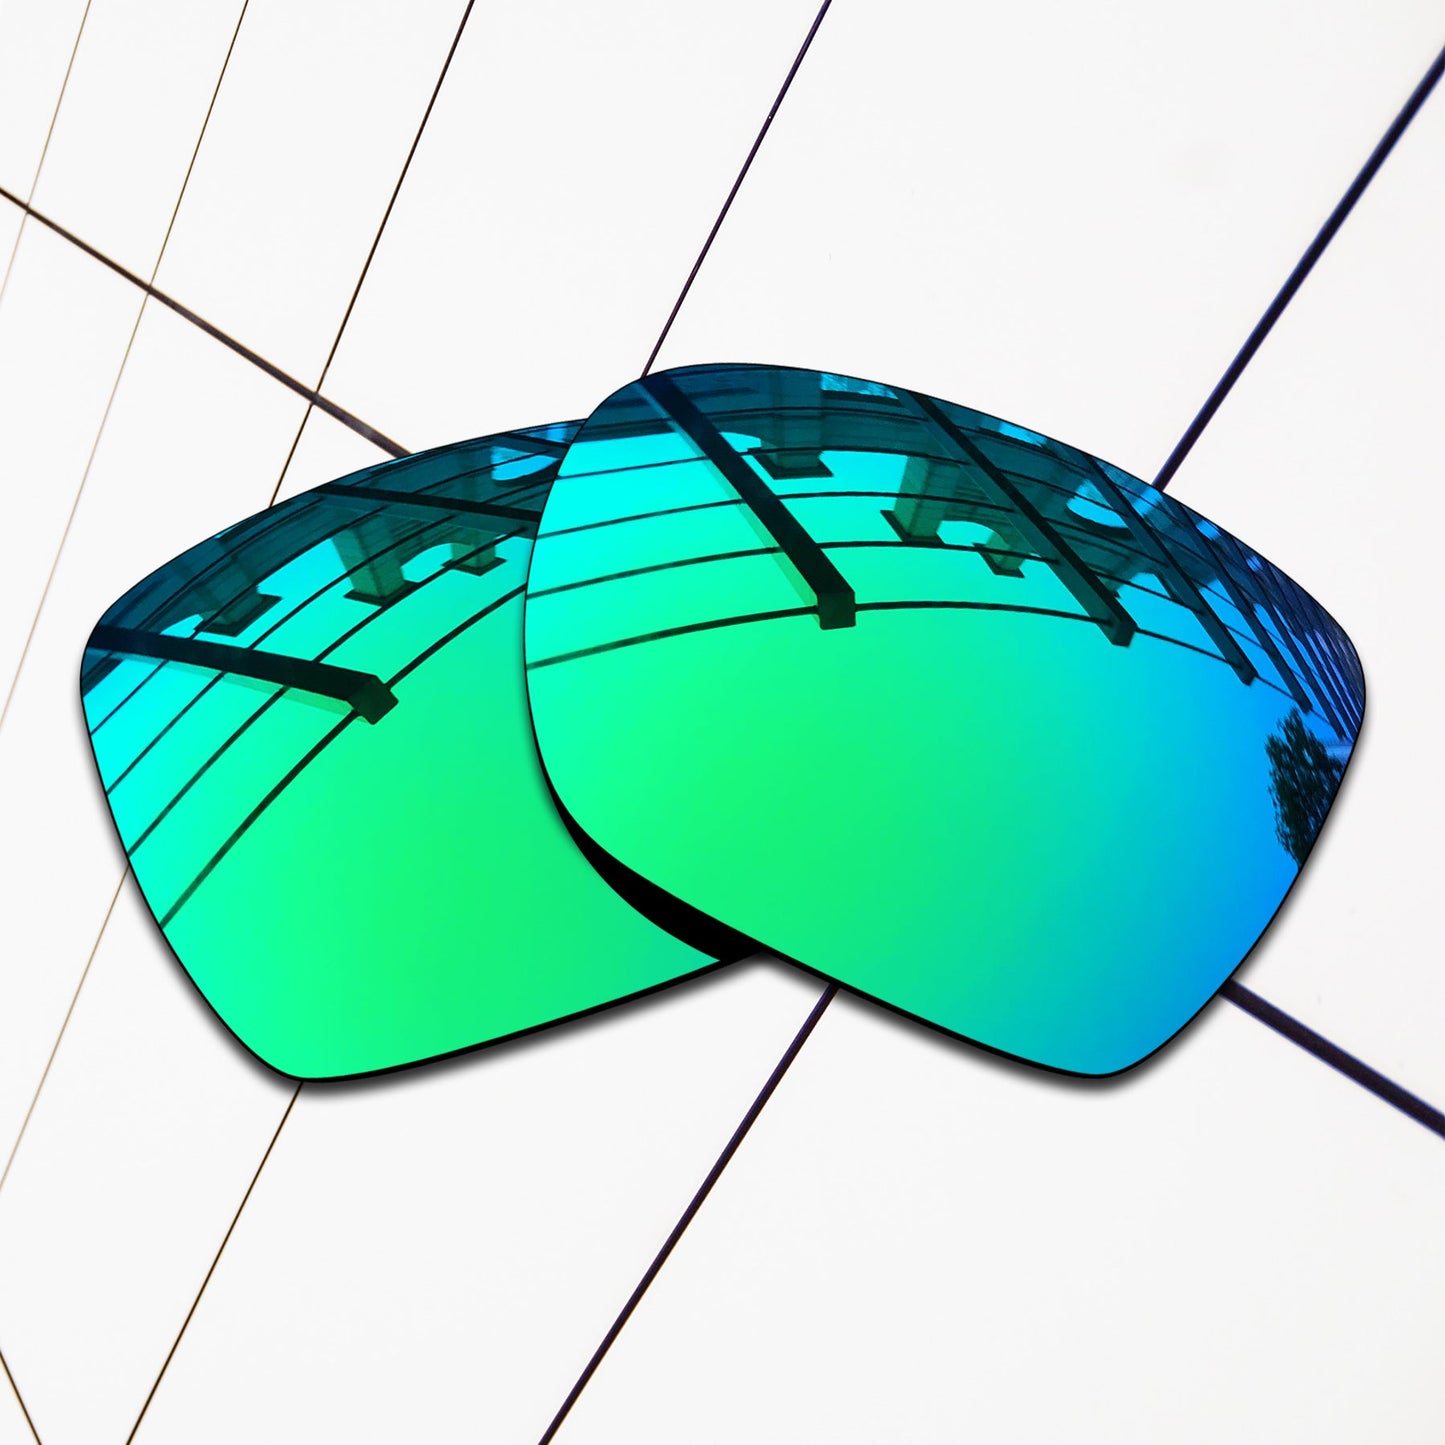 Polarized Replacement Lenses for Oakley Deviation Sunglasses